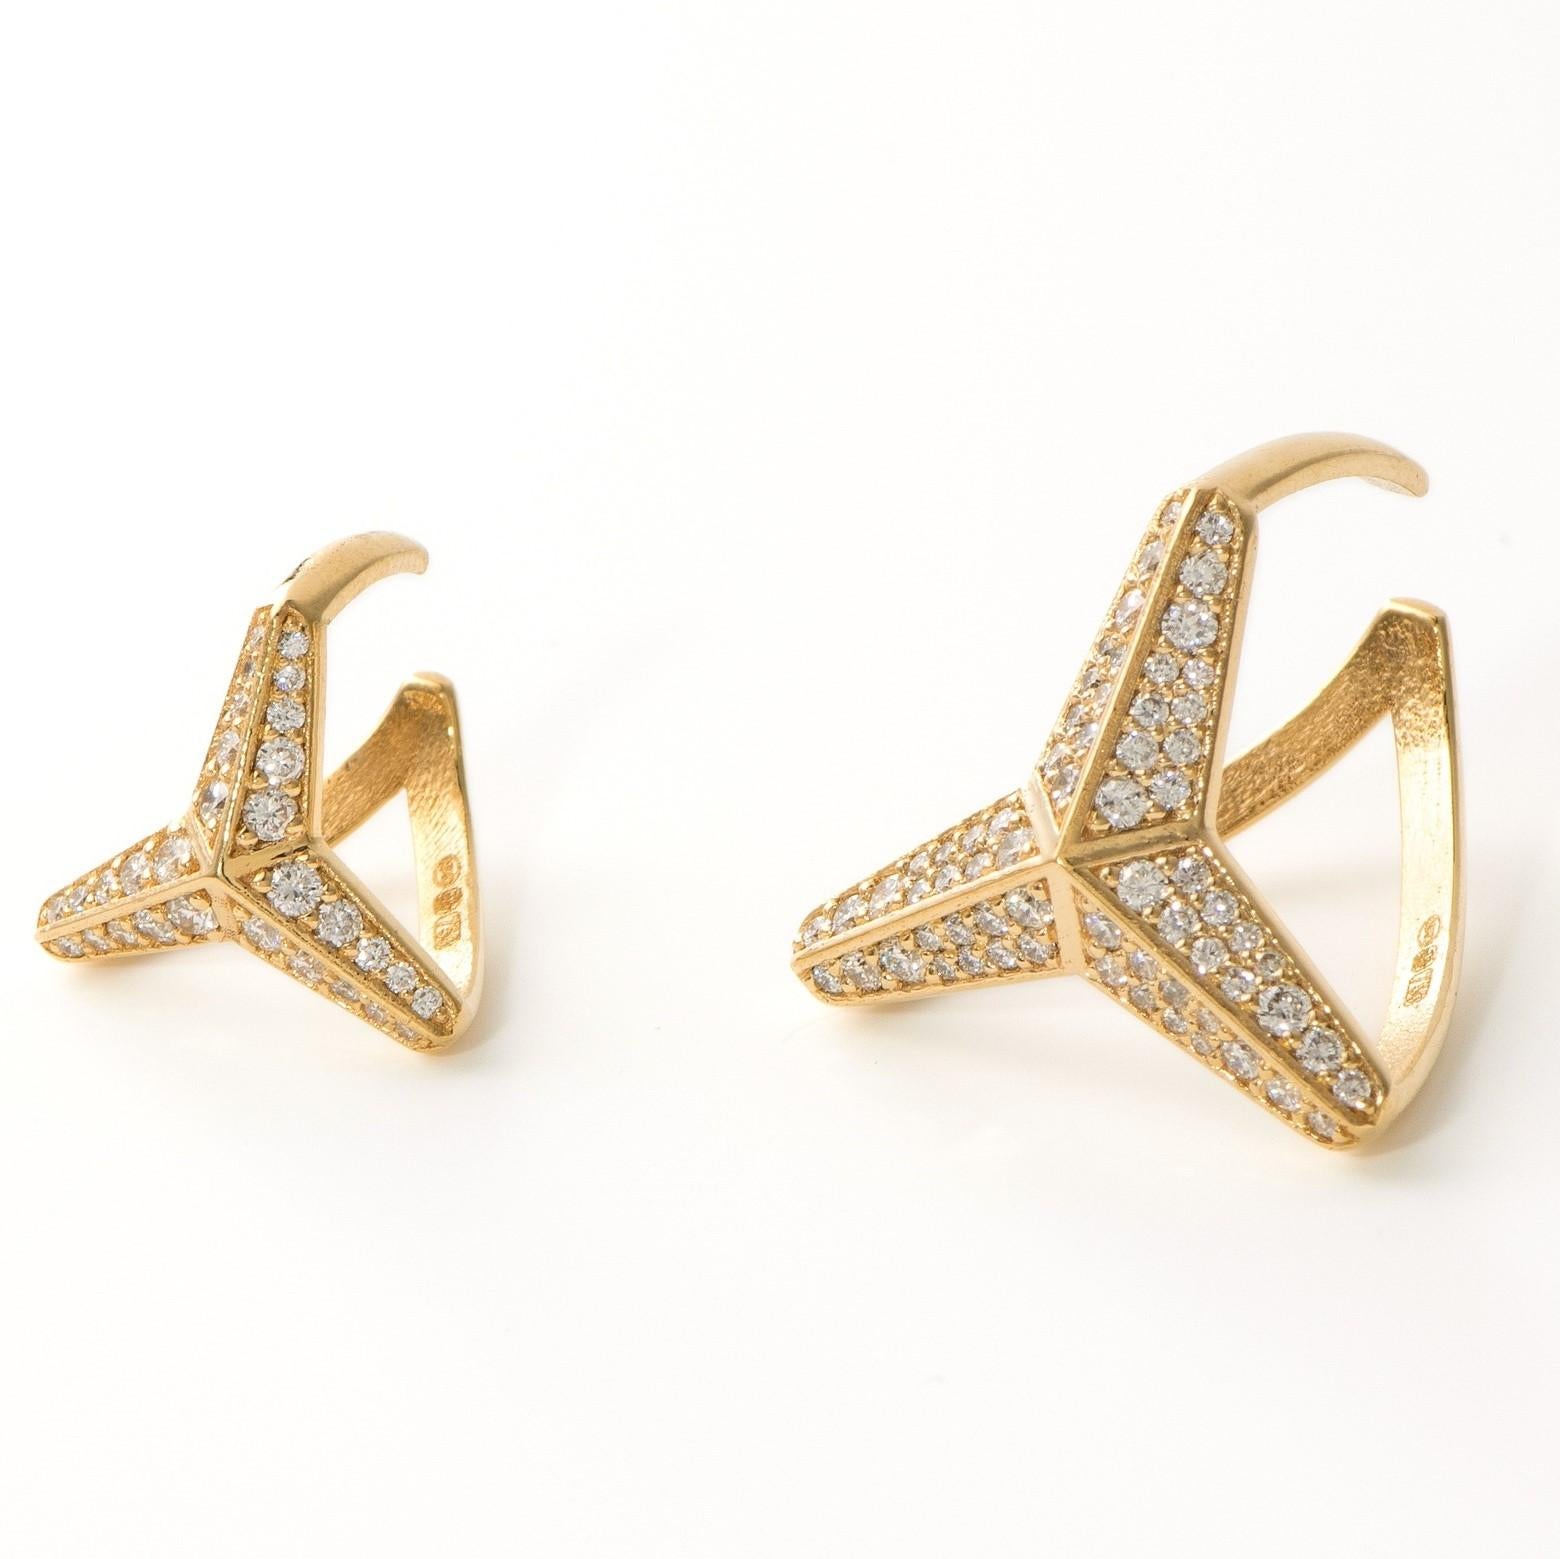 Maria Kotsoni Contemporary 18k Gold Three Pointed Star Large Diamond Ear Cuff For Sale 1